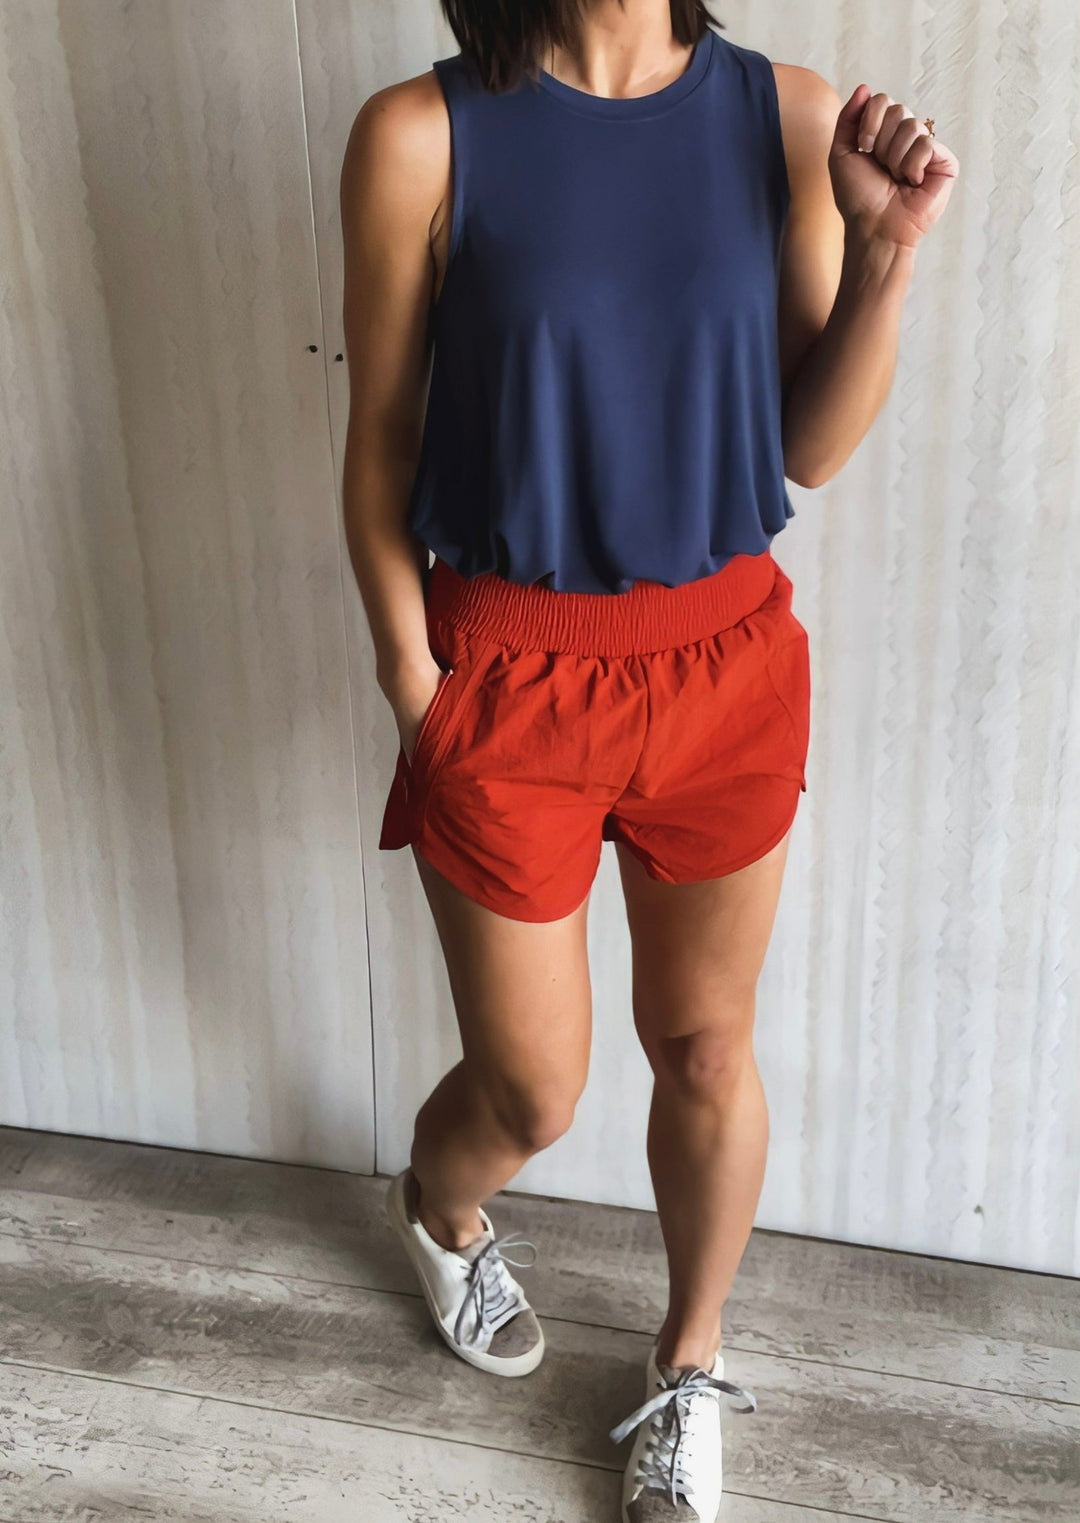 Orange Copper Smocked Waist Shorts with Navy Tank Top